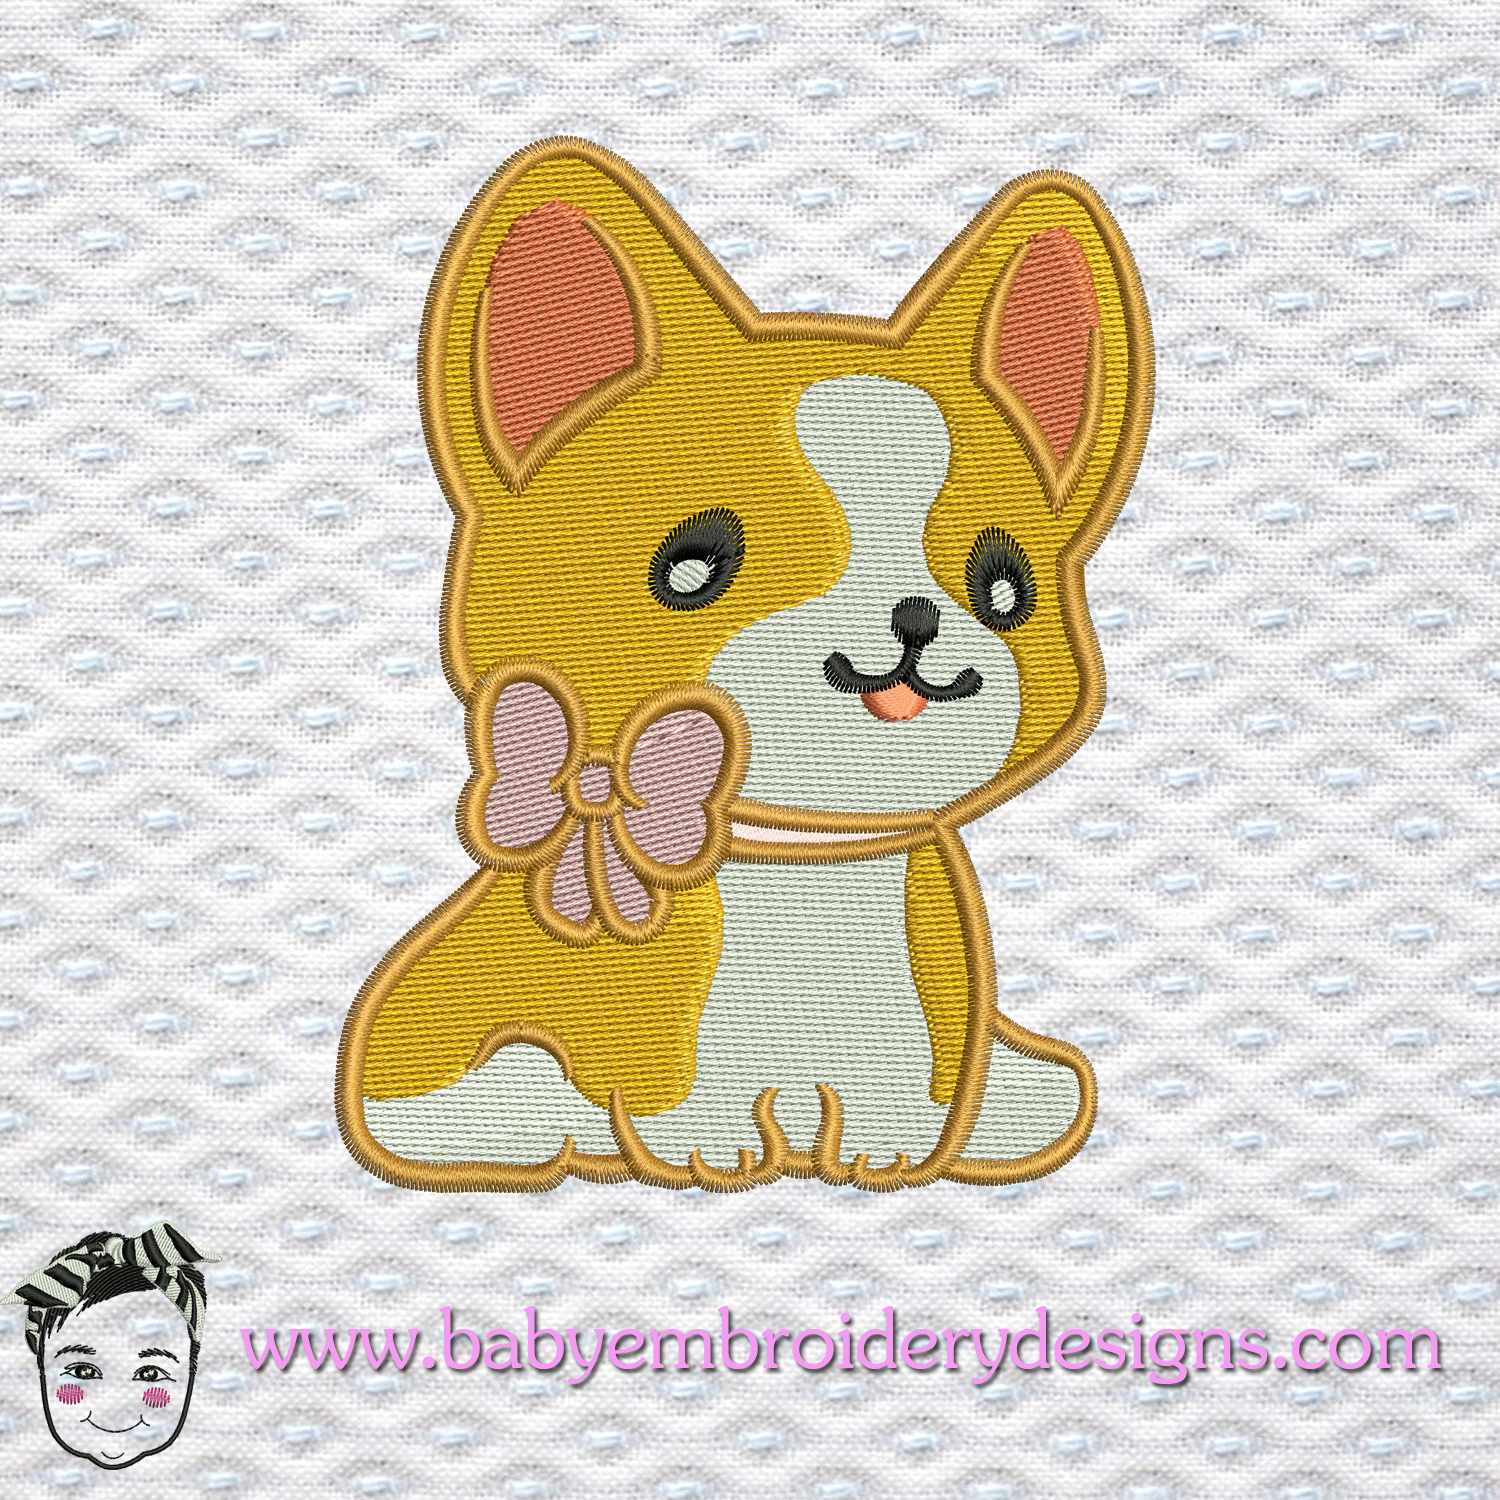 Baby Embroidery Patterns Embroidery Designs Ba Pembrok Dog Instant Download